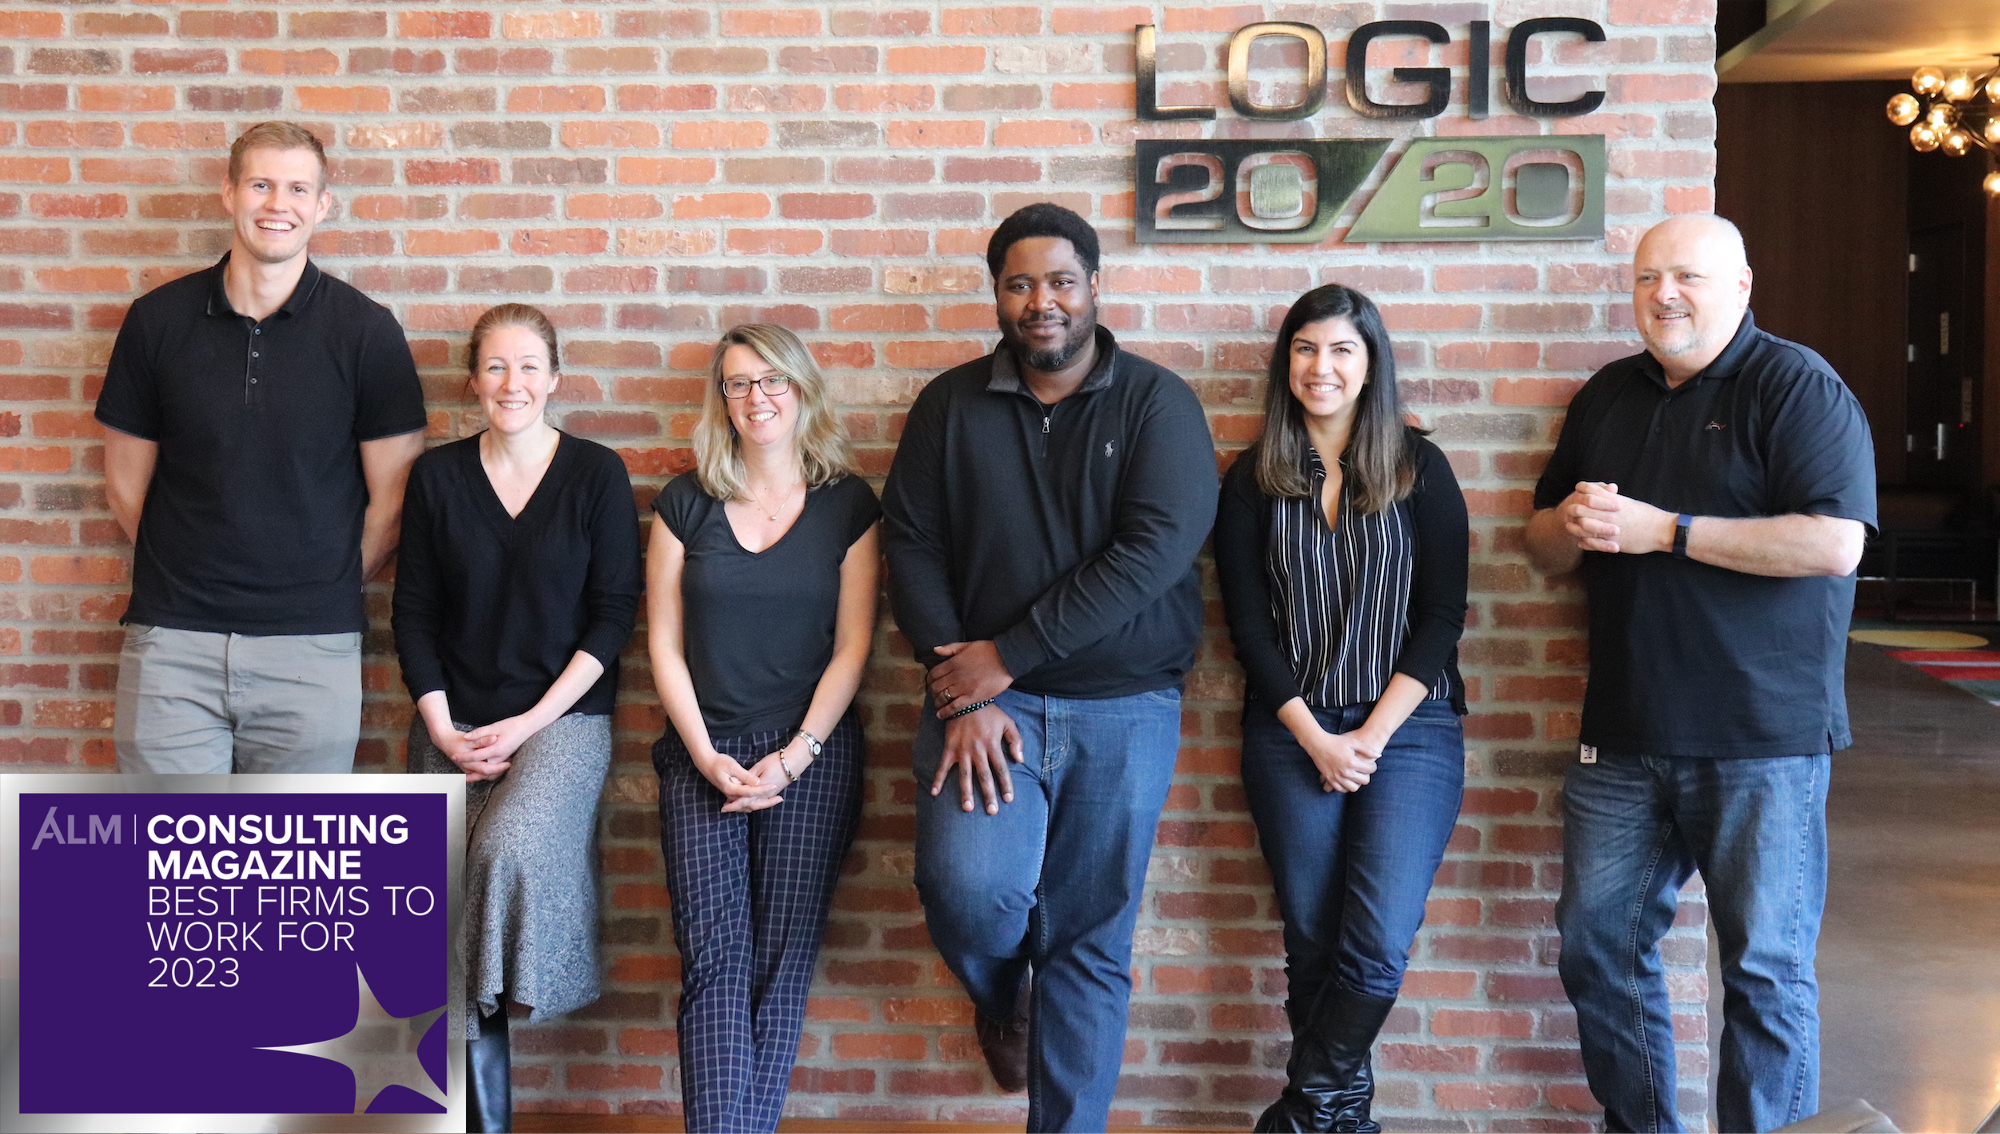 Logic20/20 team members pose in front of our lobby sign